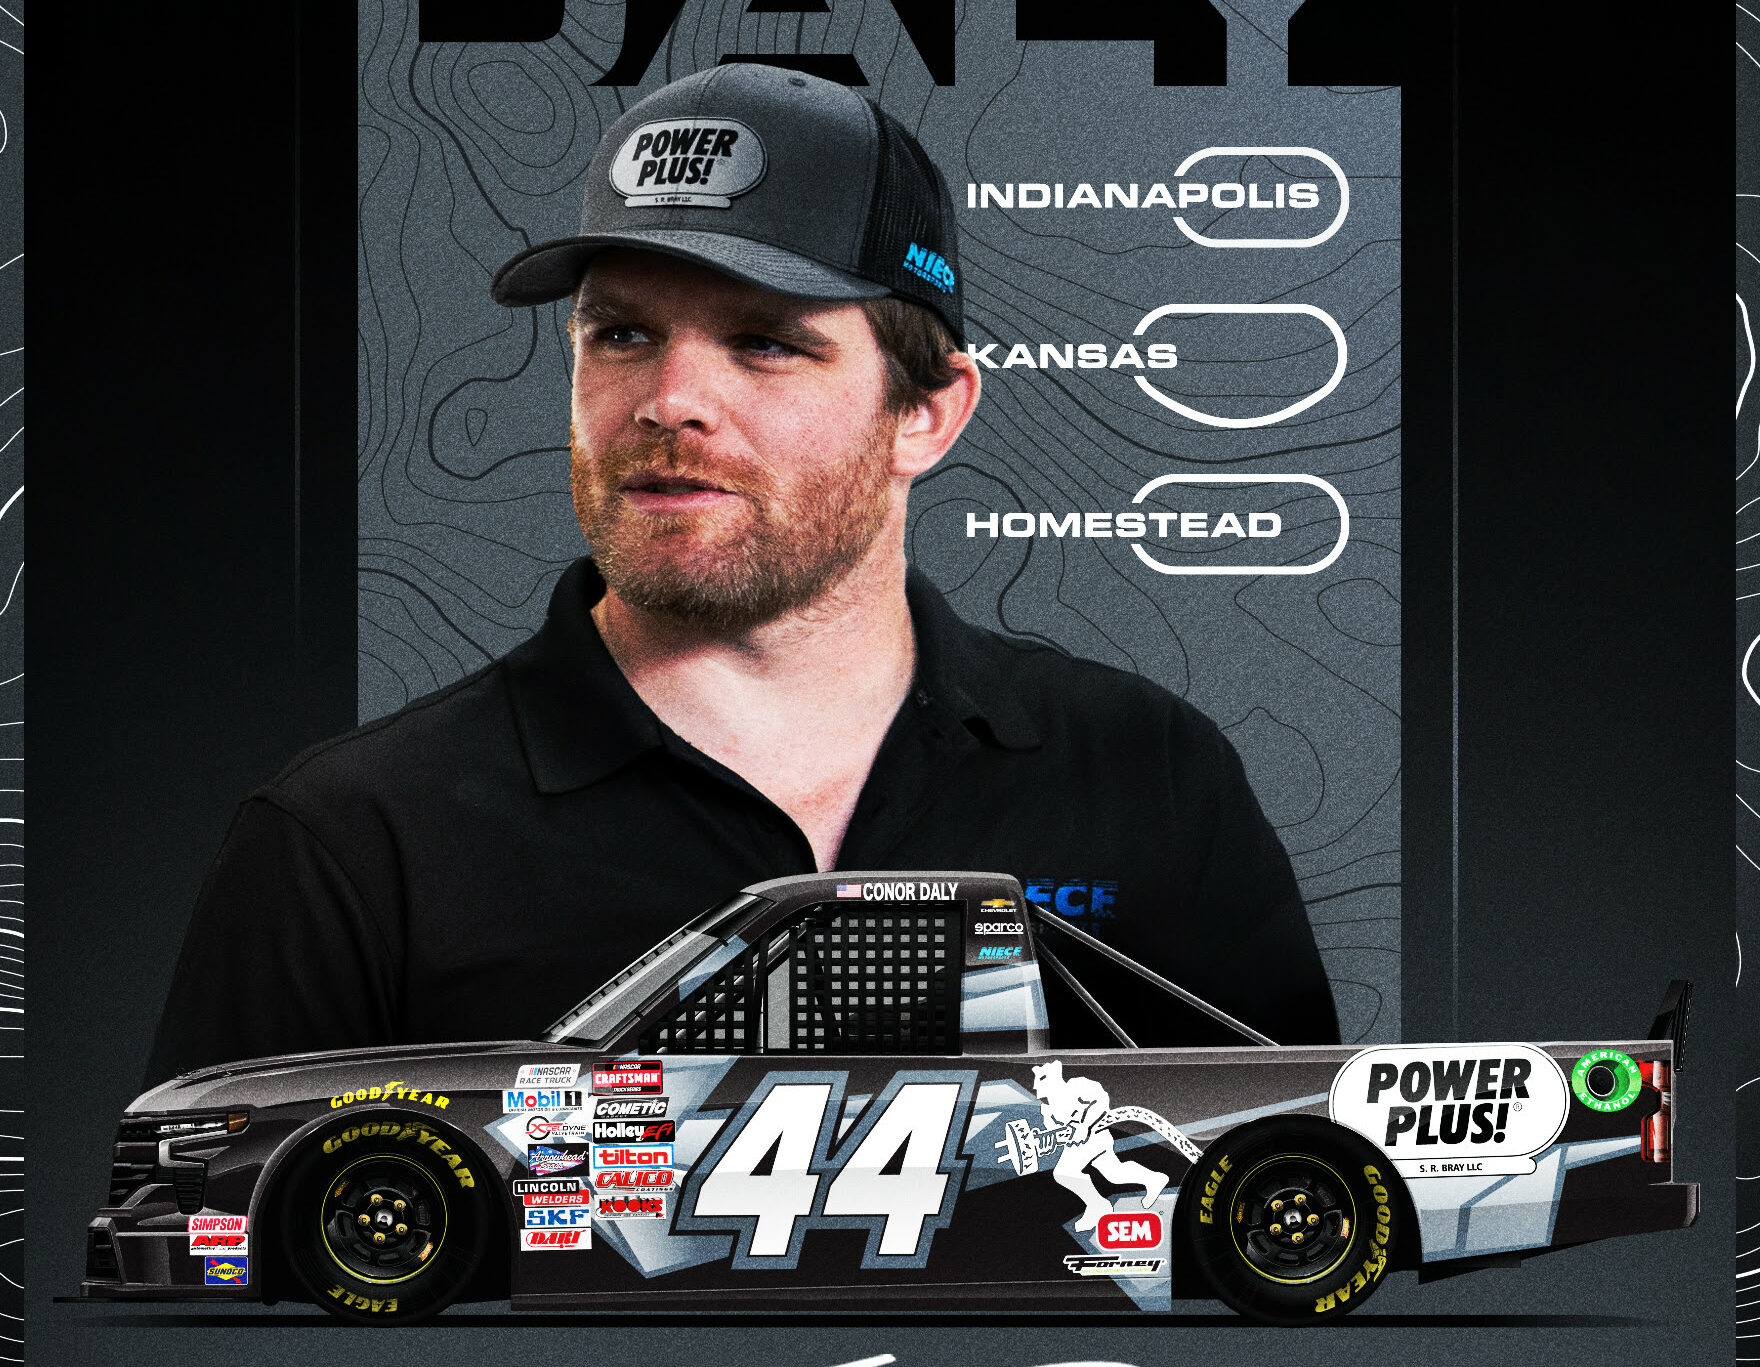 Niece Motorsports Tabs Conor Daly to Three-Race Deal in the NASCAR CRAFTSMAN Truck Series